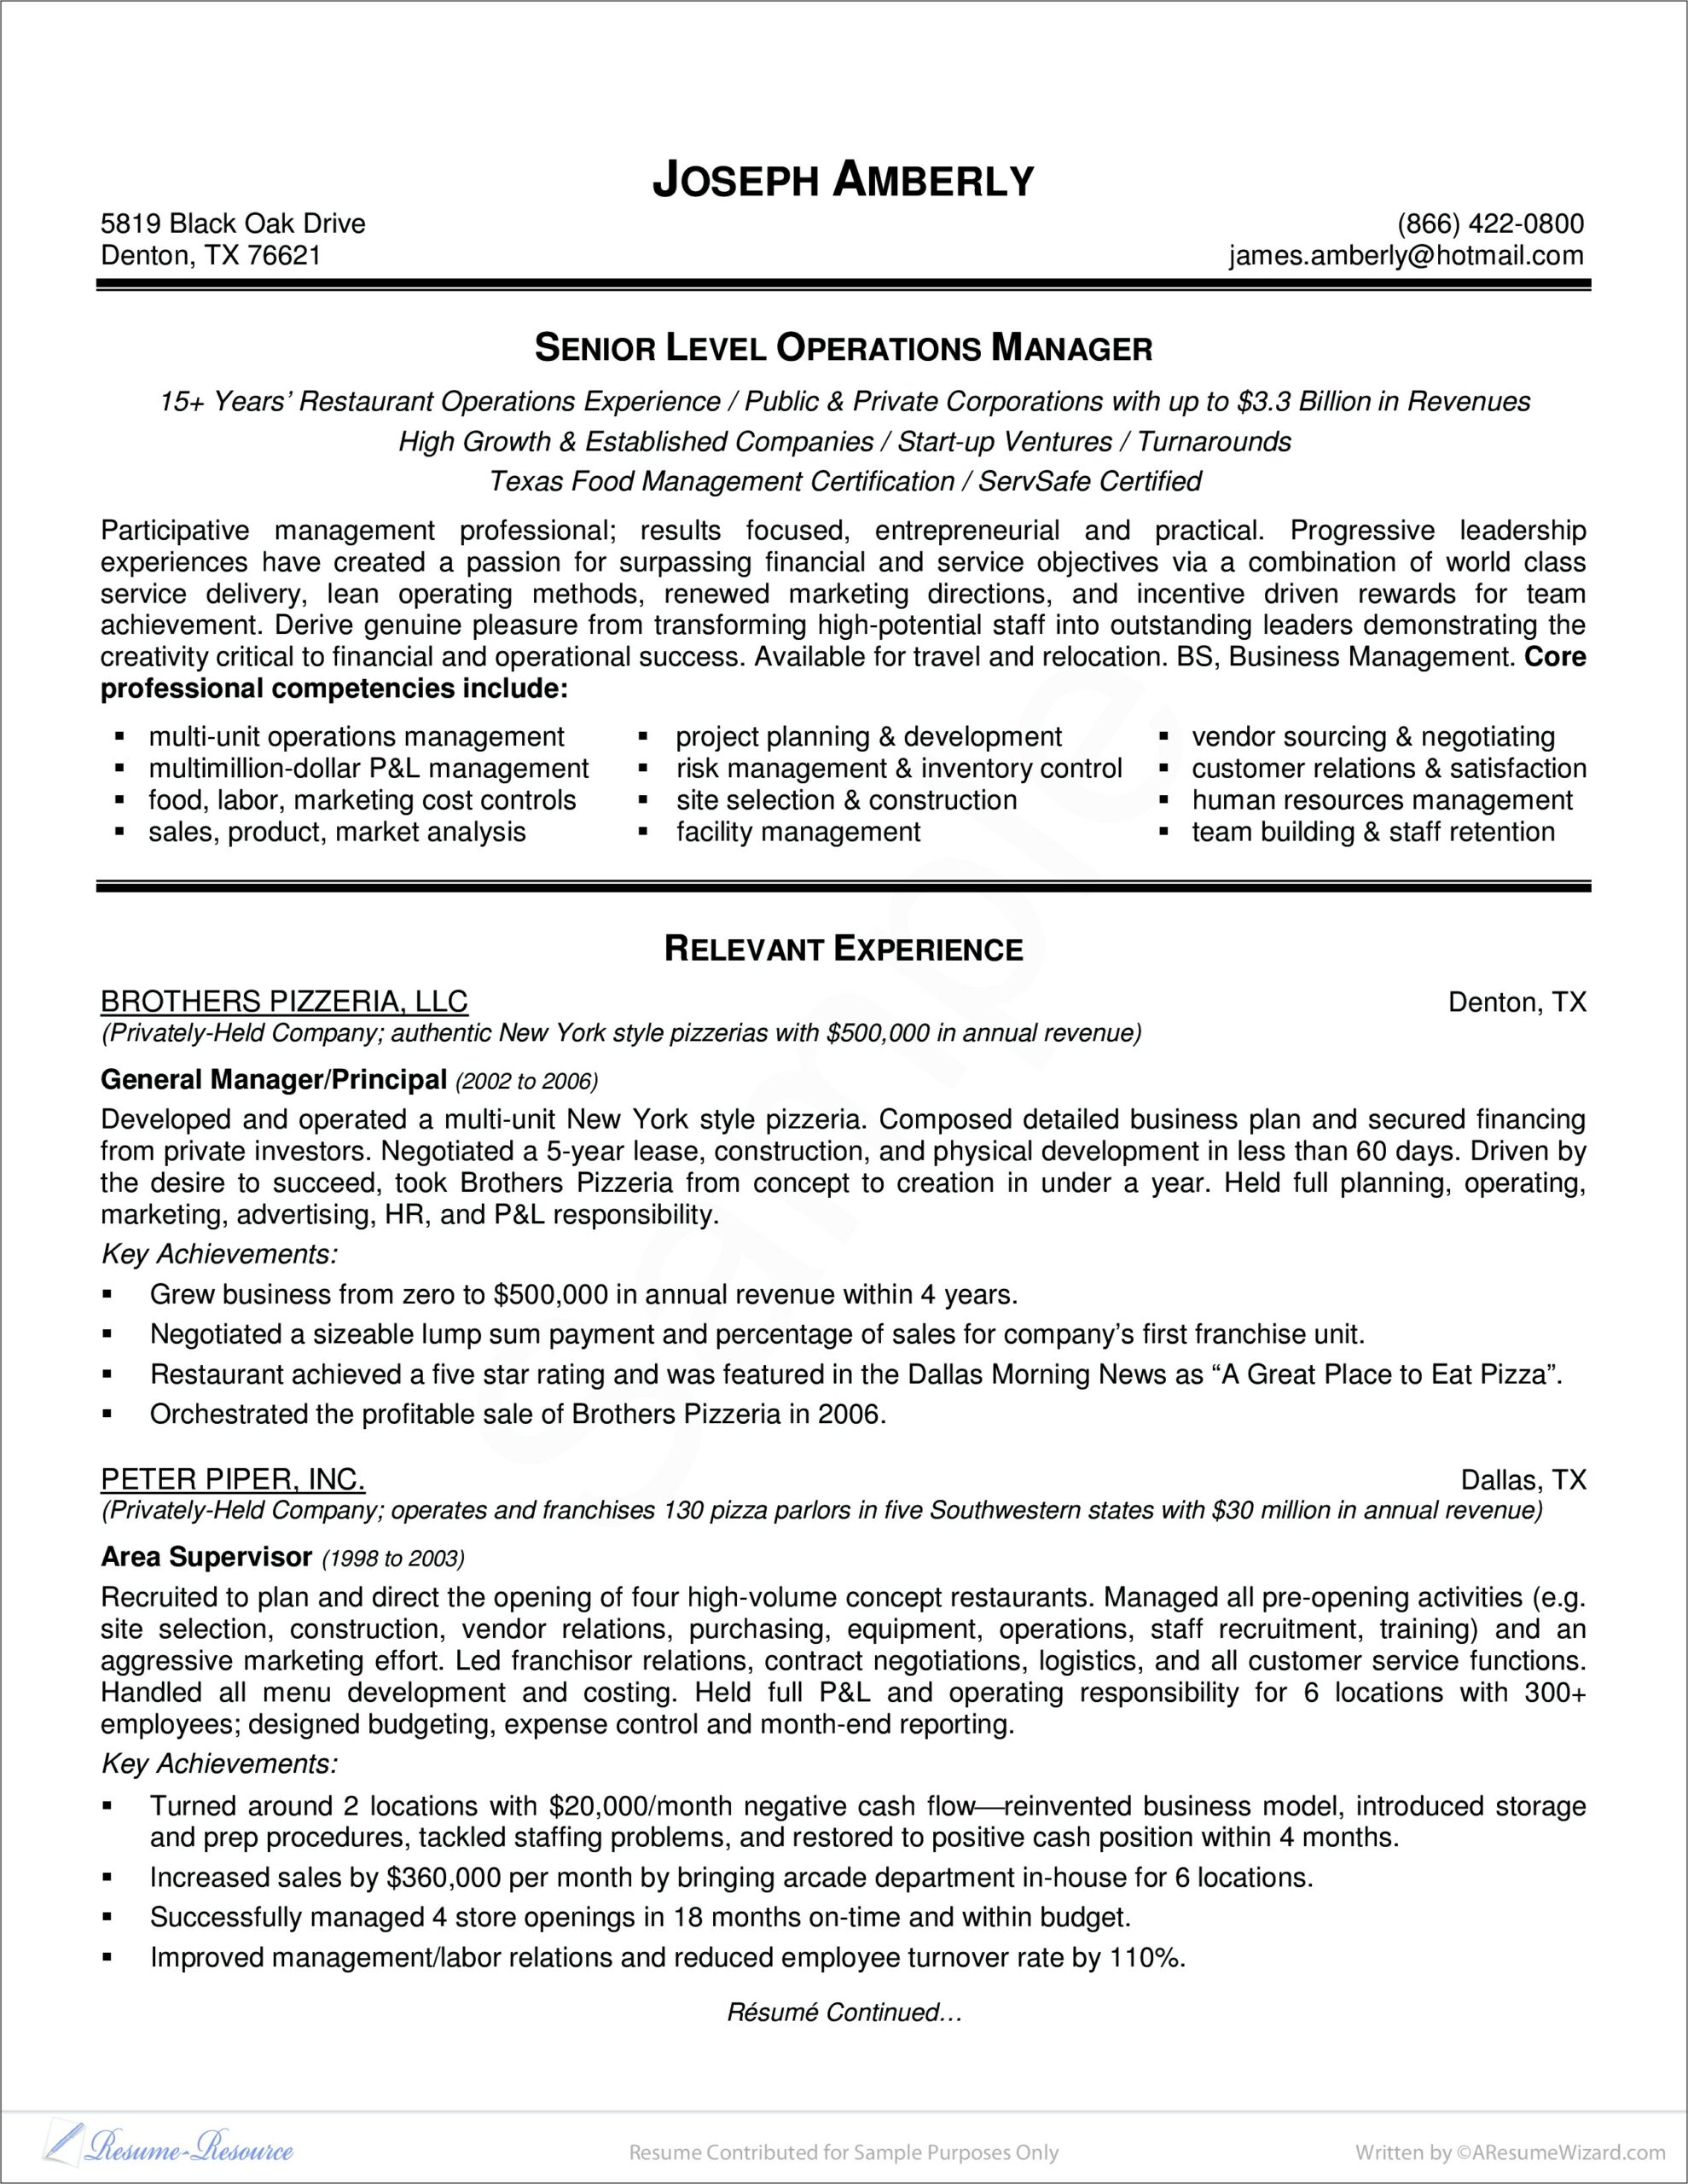 Law Firm Operations Manager Resume